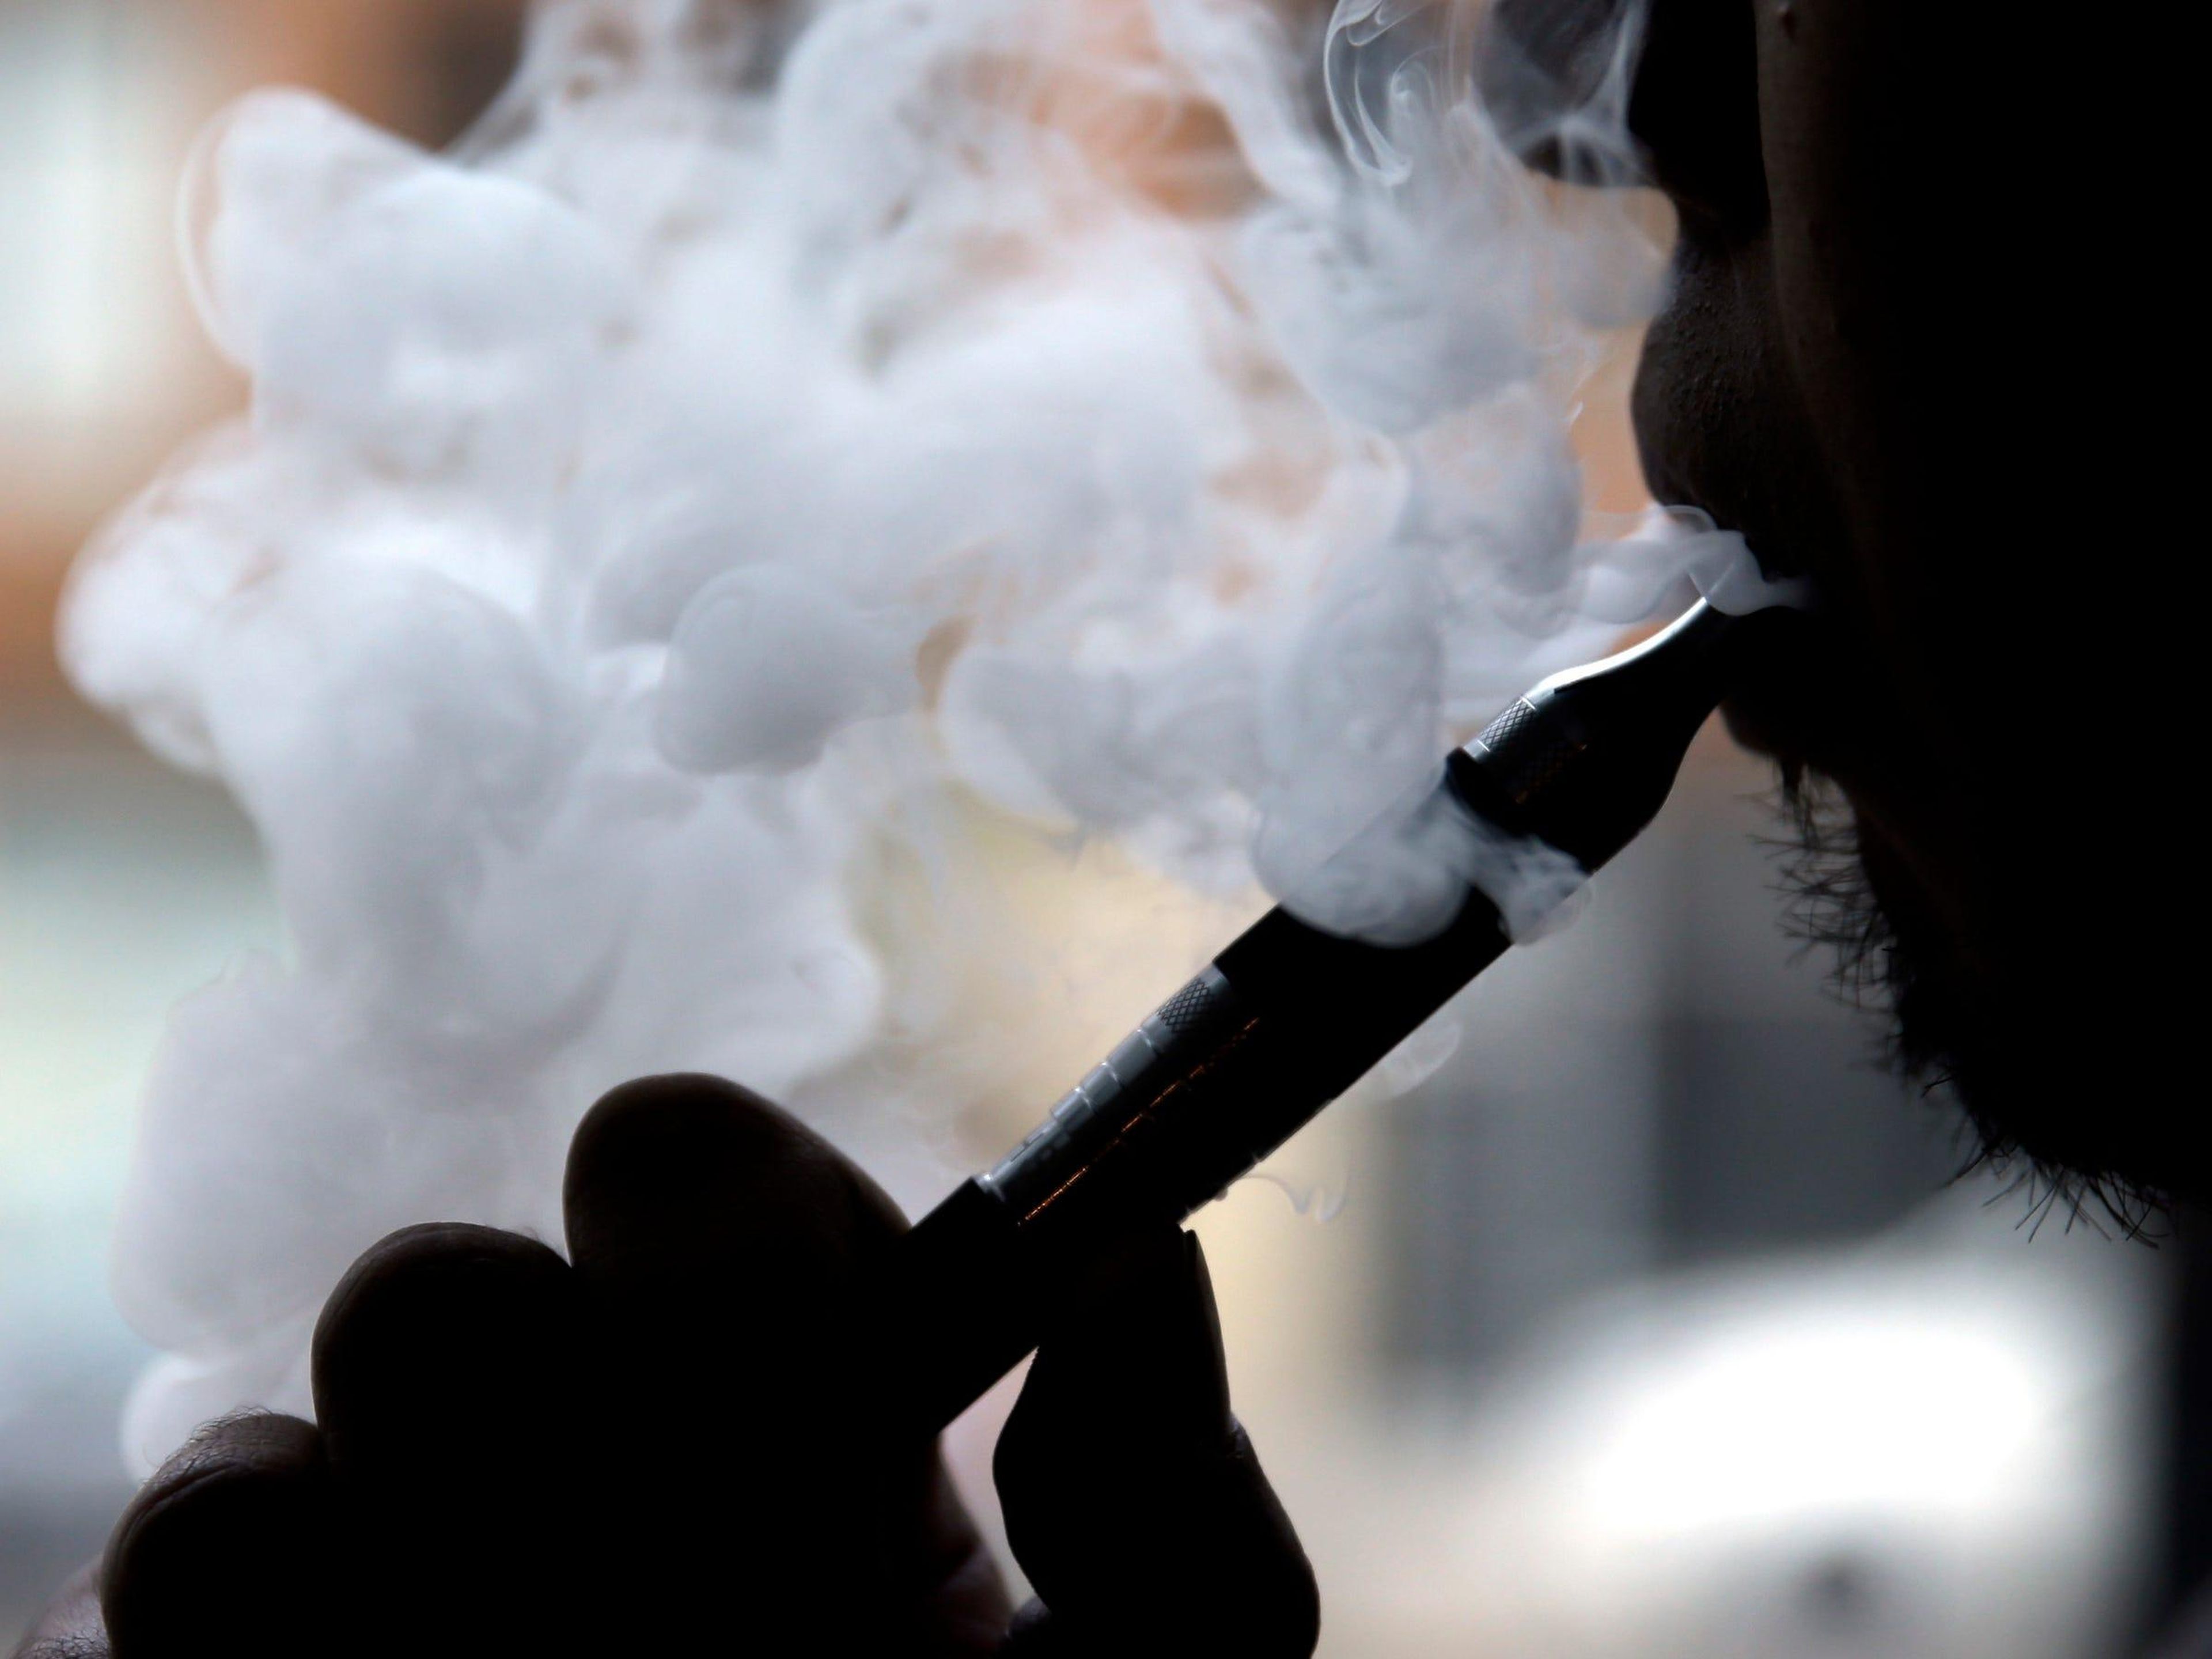 Just 6.1% of British vapers in 2019 had never smoked, according to UK government research.